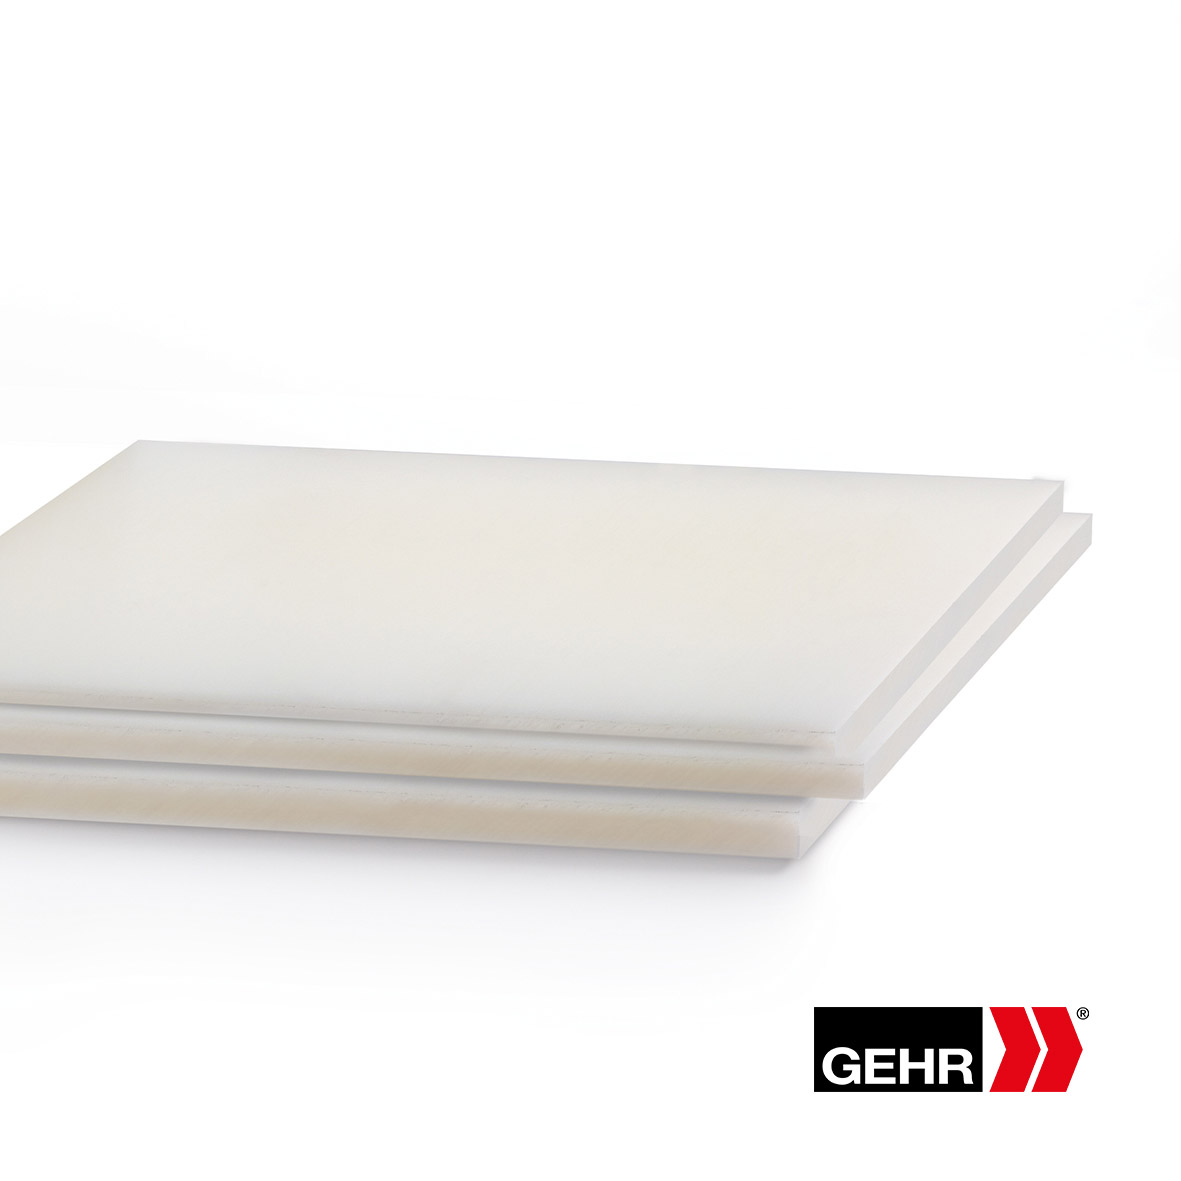 GEHR POM-ESD 9 Sheets 610 x 20 mm ivory